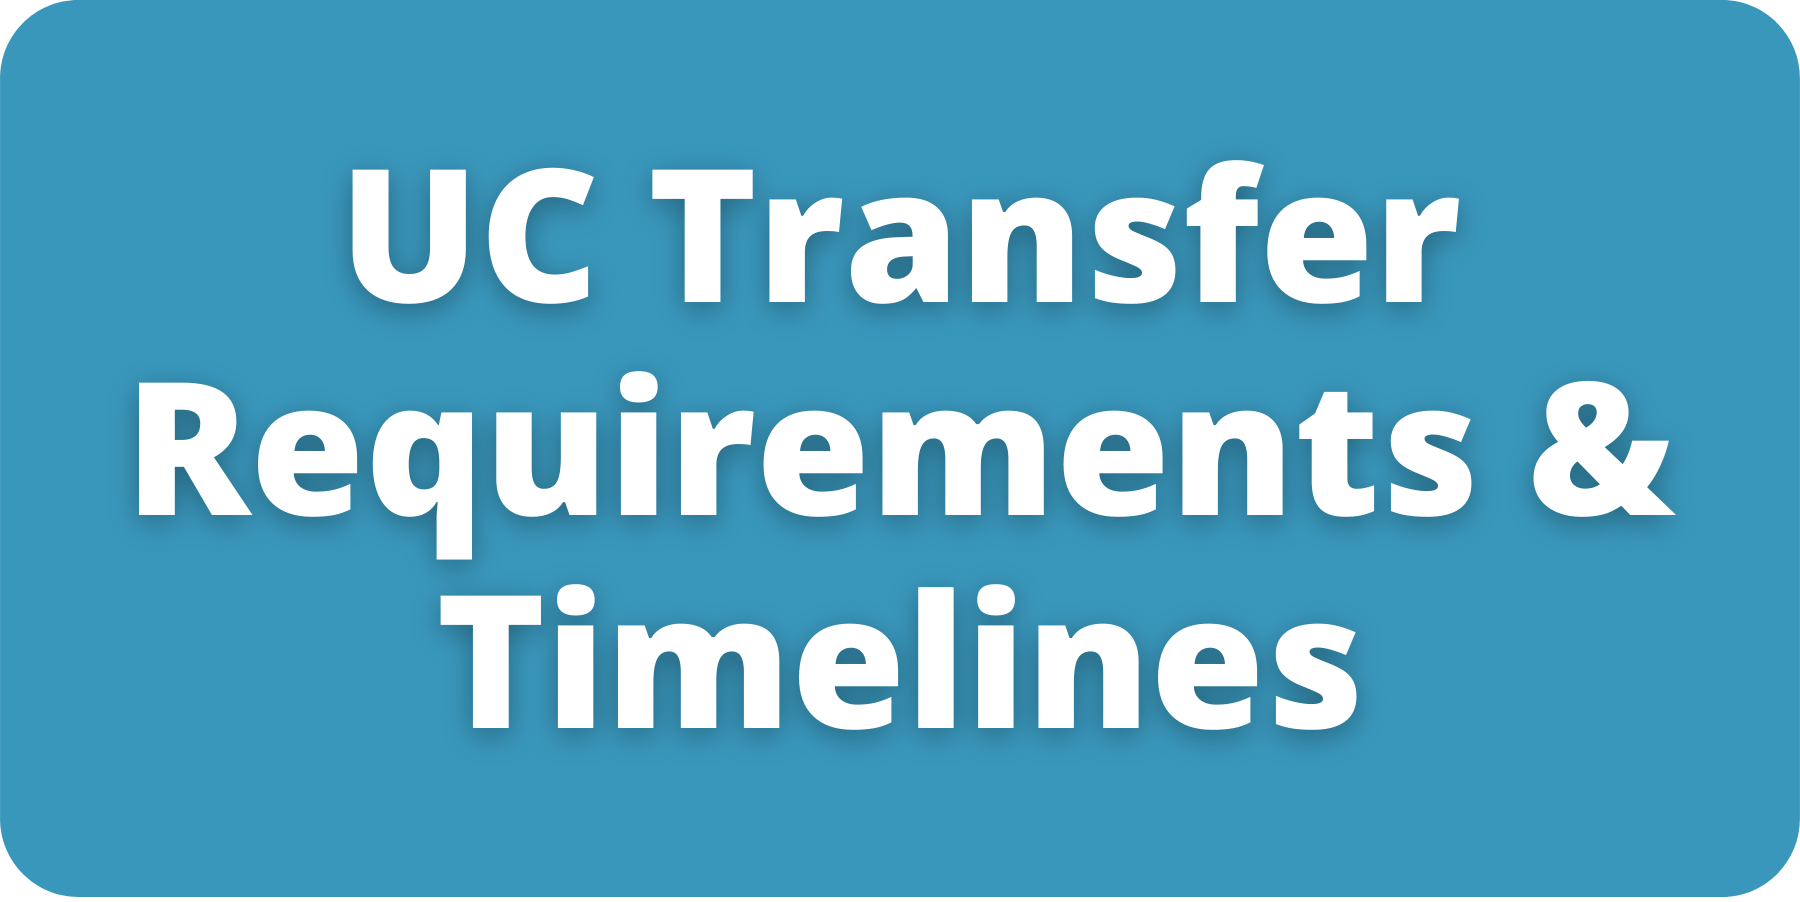 UC Requirements and Timelines